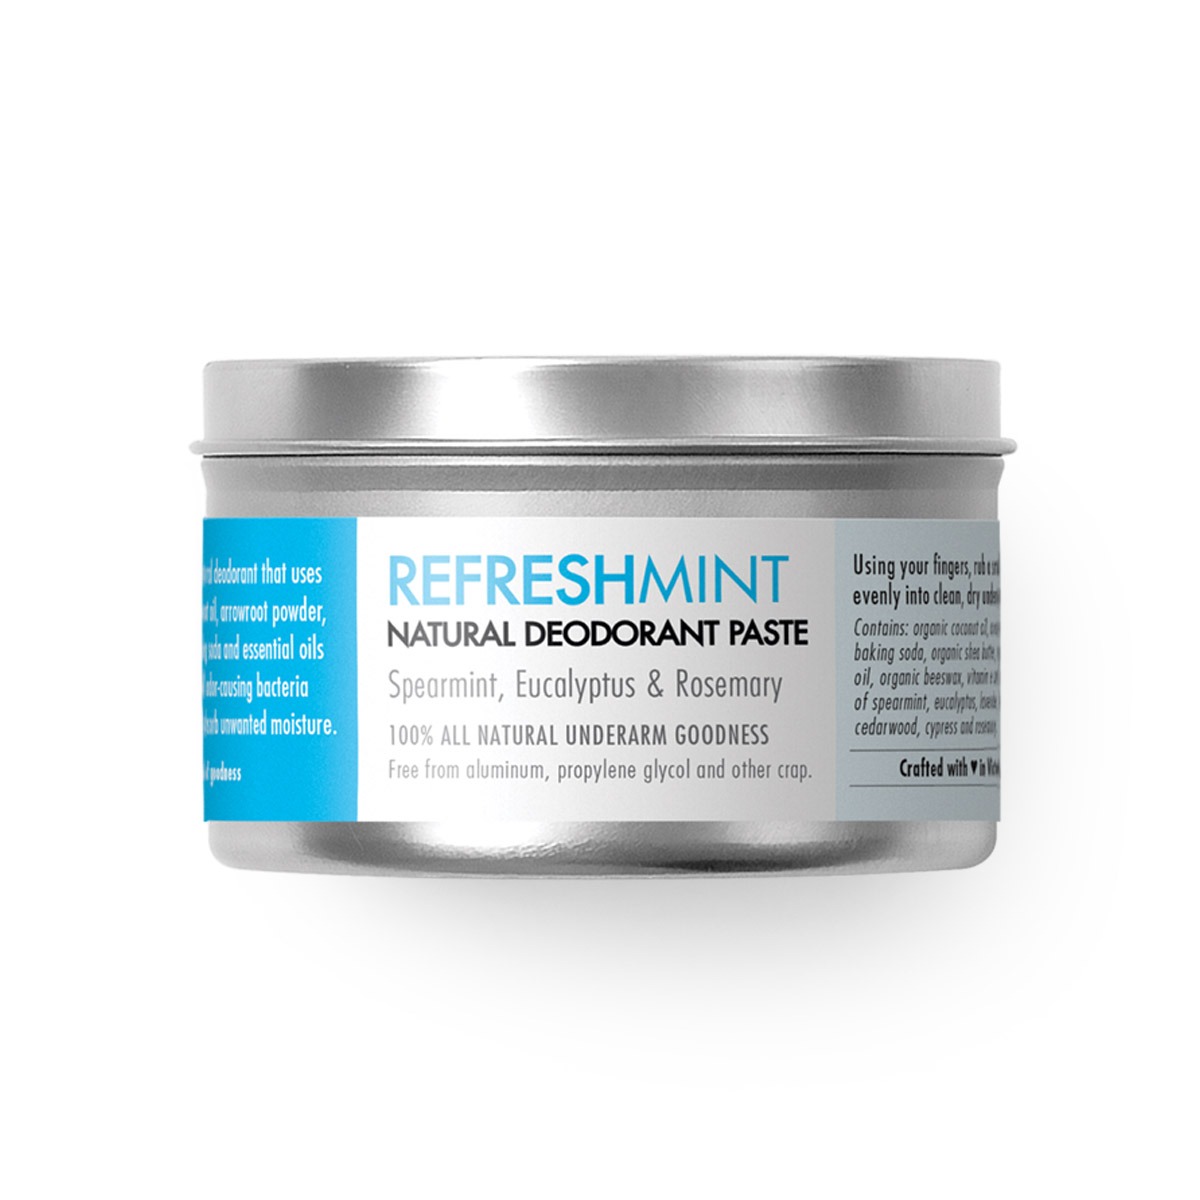 Natural Deodorant with Spearmint and Eucalyptus - Refreshmint - Chemical free. Aluminum Free. Paraben Free. Made in Canada.